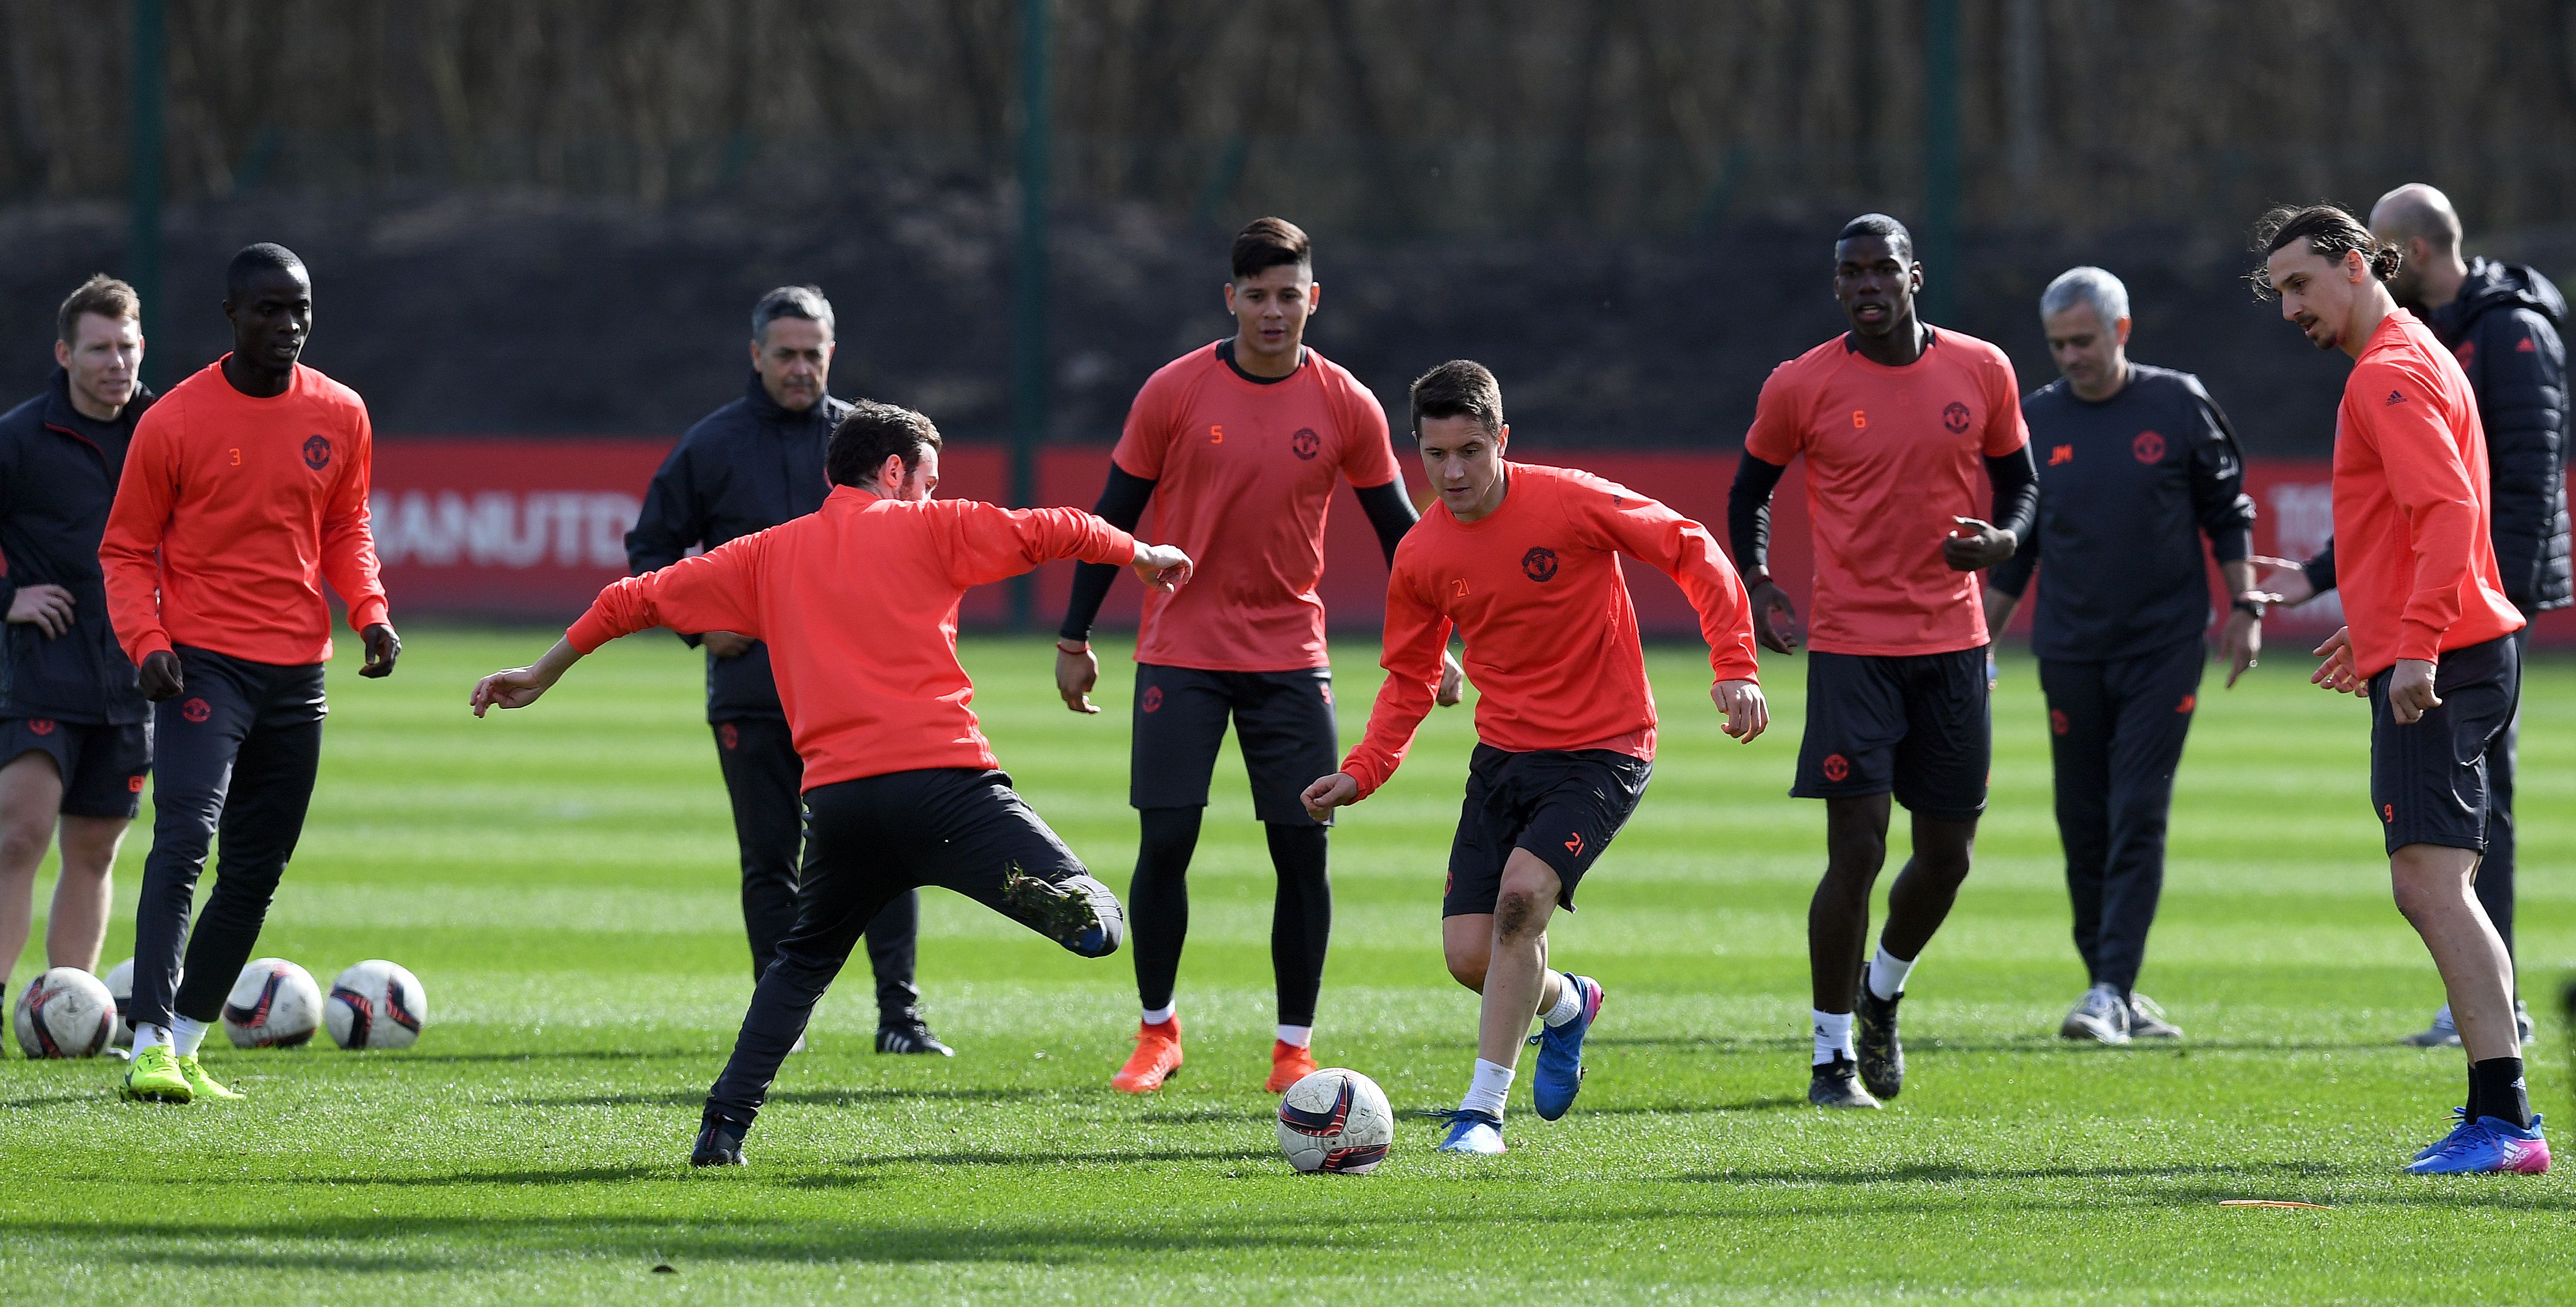 Manchester United's Spanish midfielder Juan Mata (4L) and Manchester United's Spanish midfielder Ander Herrera (C) vie for the ball as they take part in a training session at their Carrington base in Manchester, north west England, on March 15, 2017, on the eve of their UEFA Europa League Round of 16 second-leg football match against Rostov.  / AFP PHOTO / Paul ELLIS        (Photo credit should read PAUL ELLIS/AFP/Getty Images)